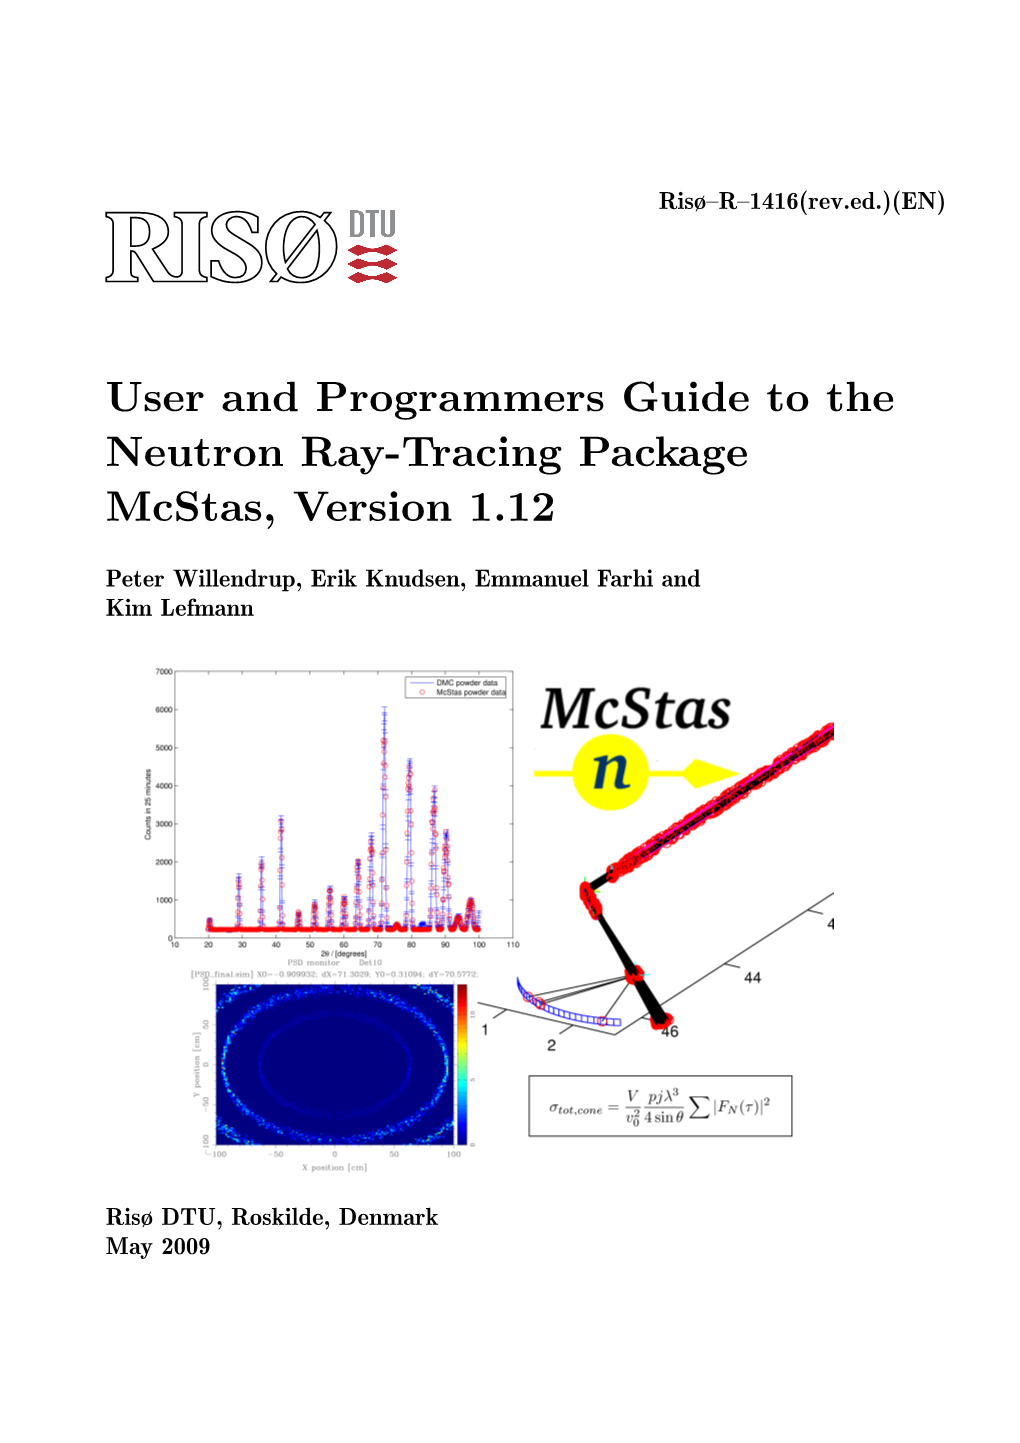 User and Programmers Guide to the Neutron Ray-Tracing Package Mcstas, Version 1.12